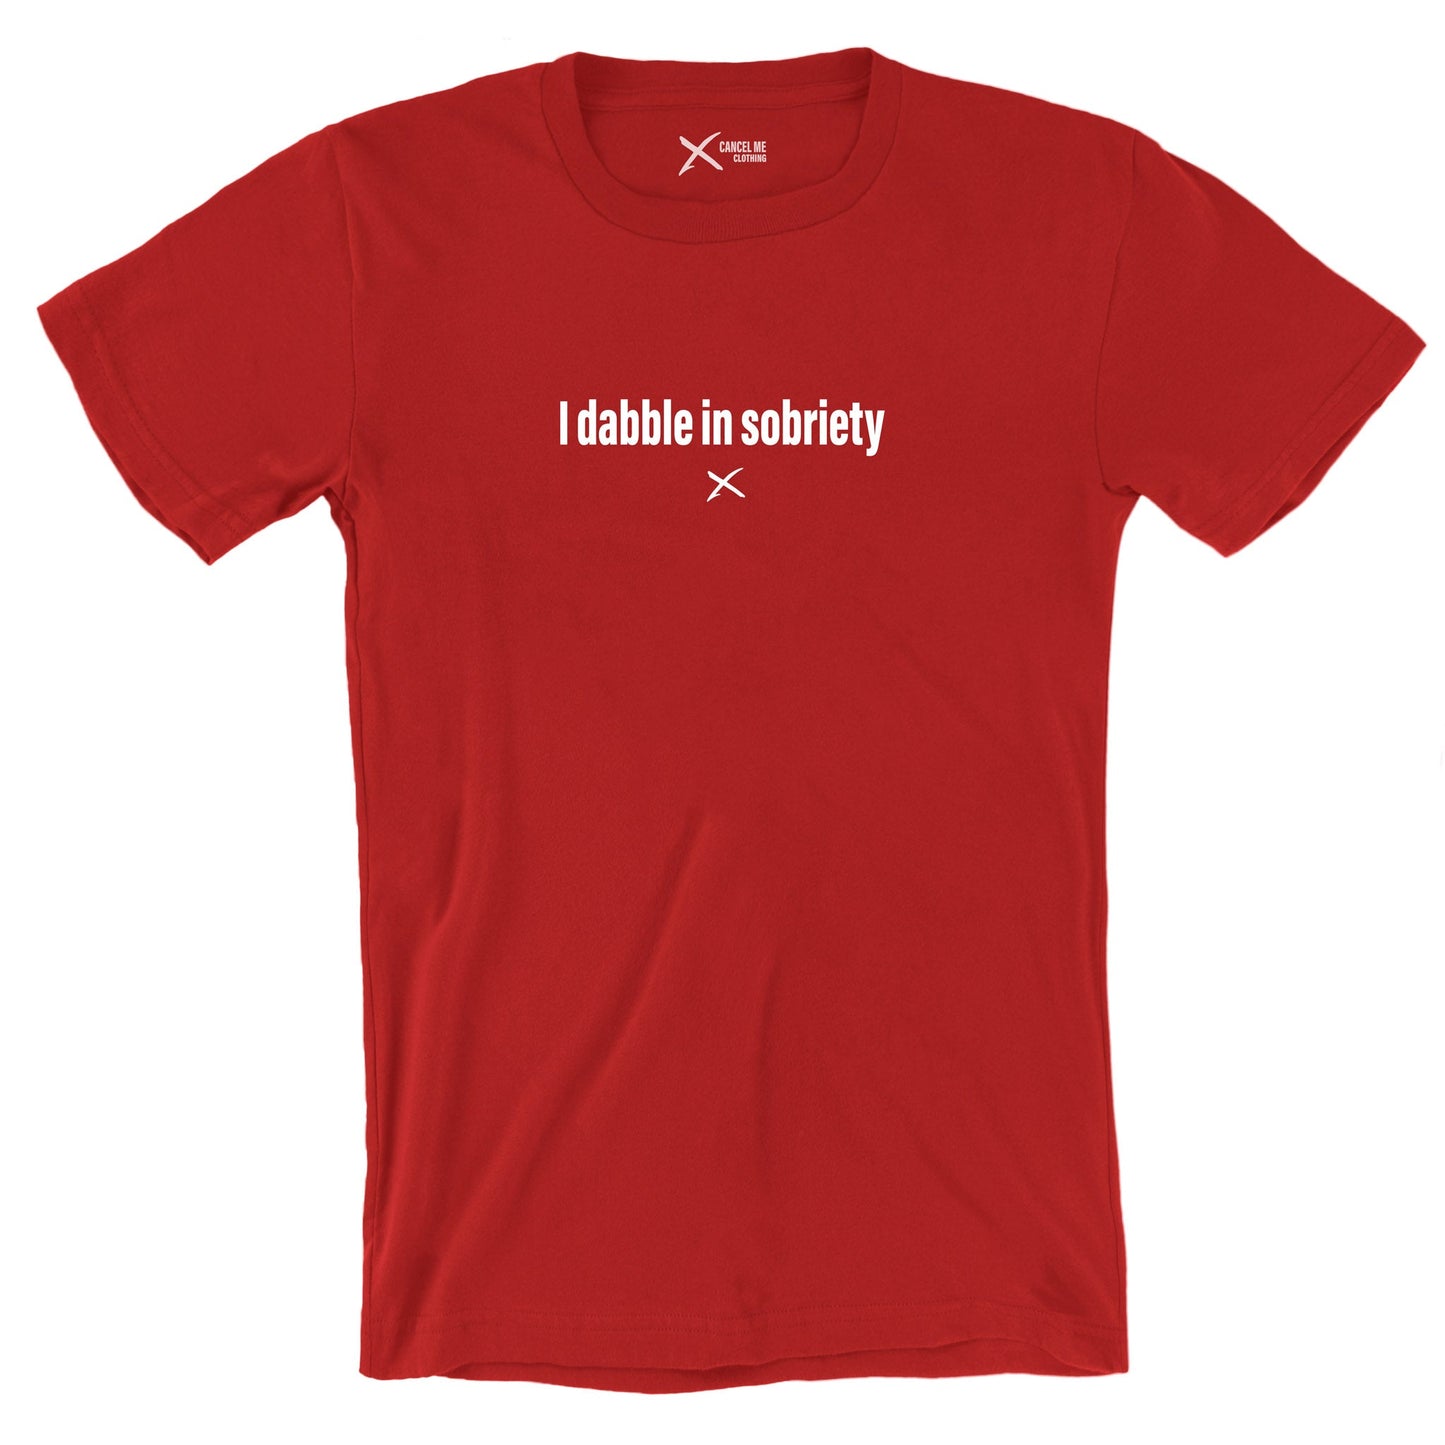 I dabble in sobriety - Shirt